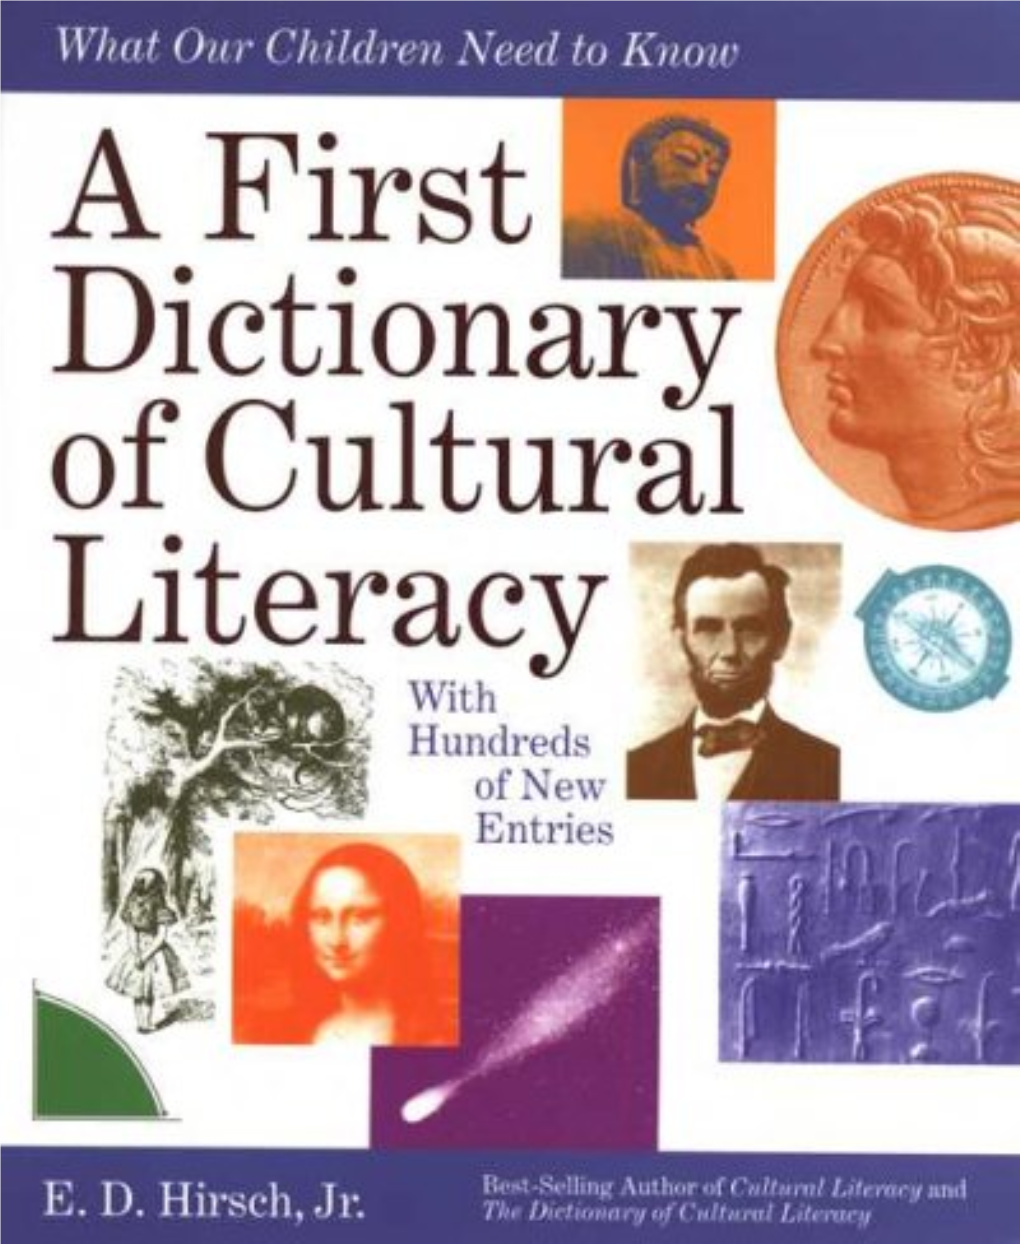 First Dictionary of Cultural Literacy What Our Children Need to Know